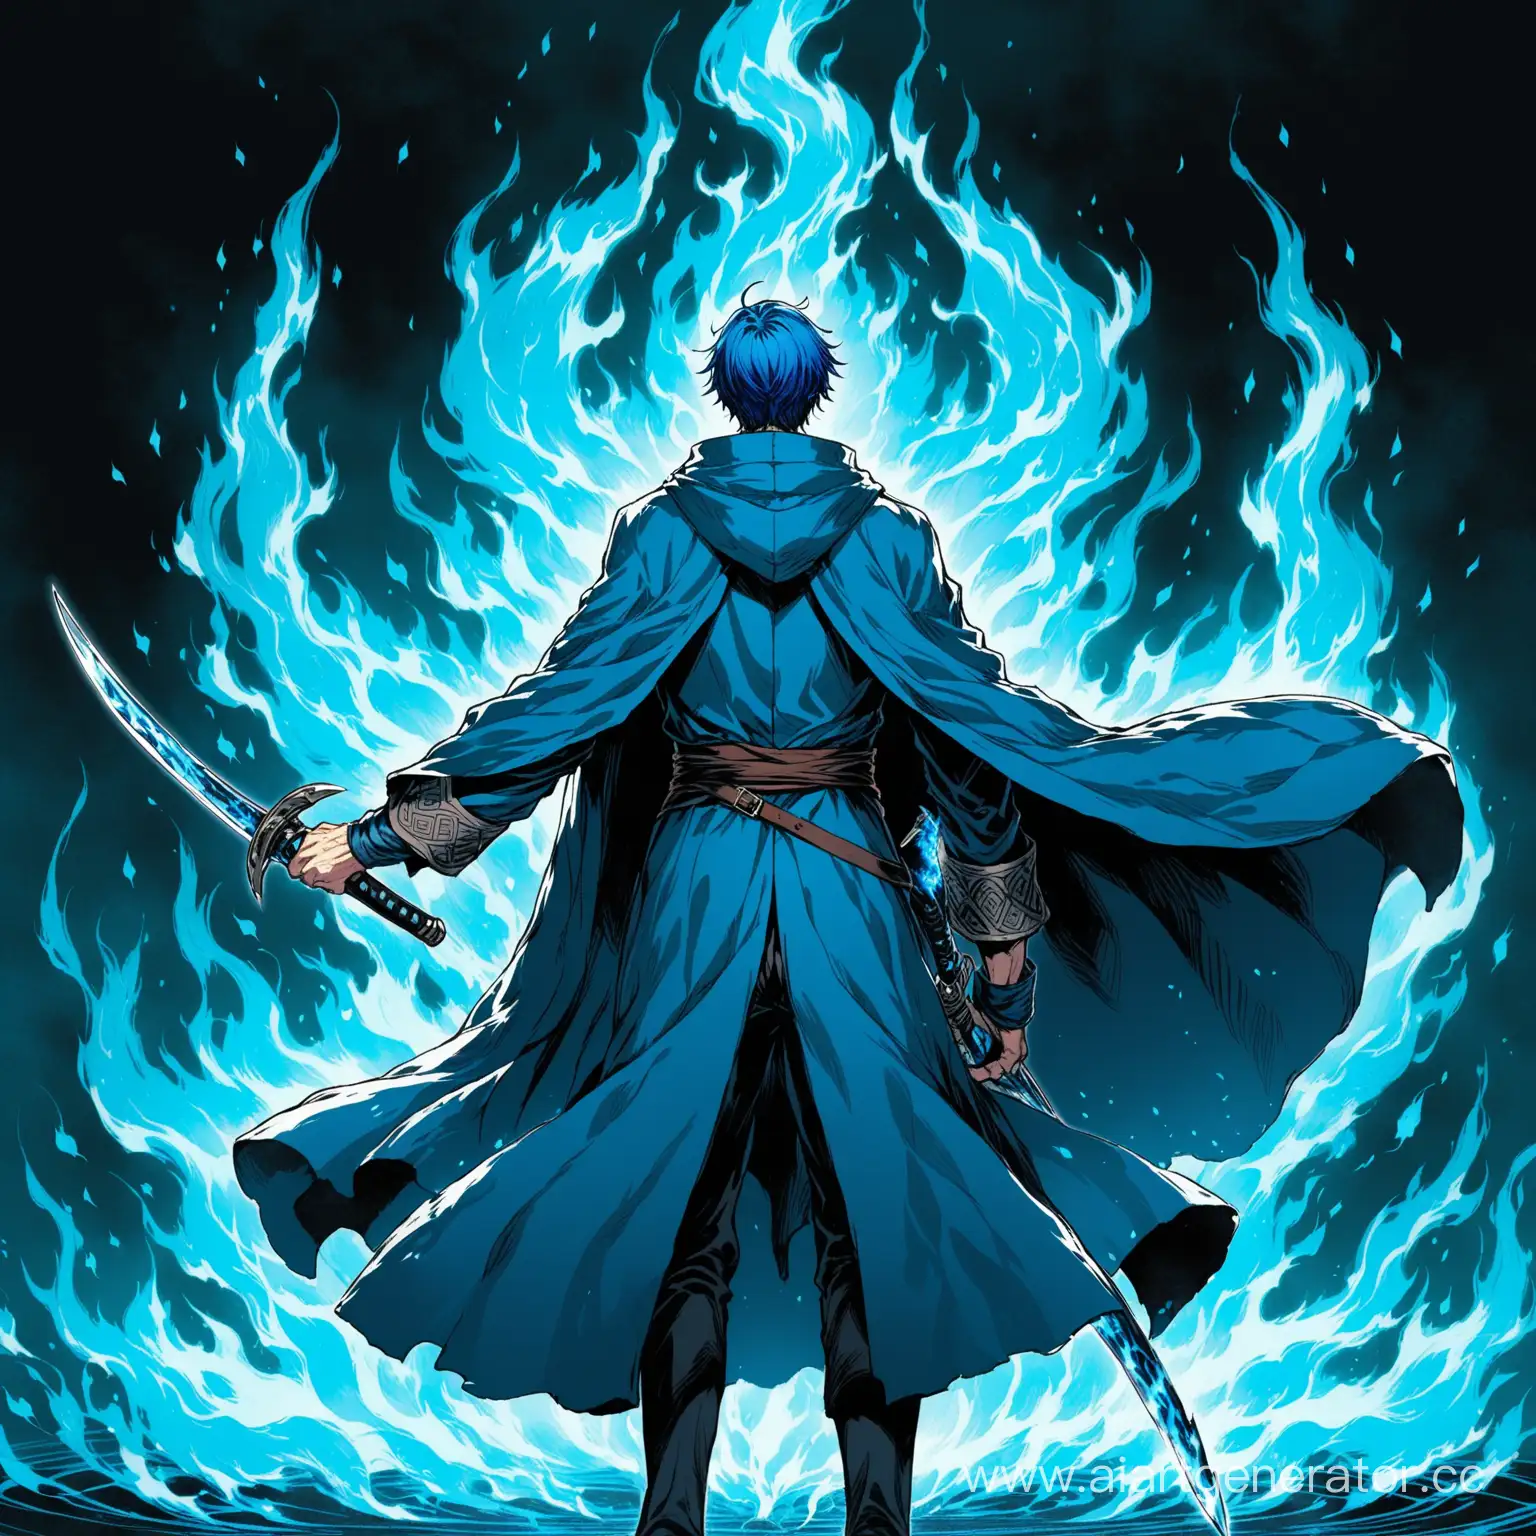 BlueHaired-Swordsman-Conjuring-Azure-Flames